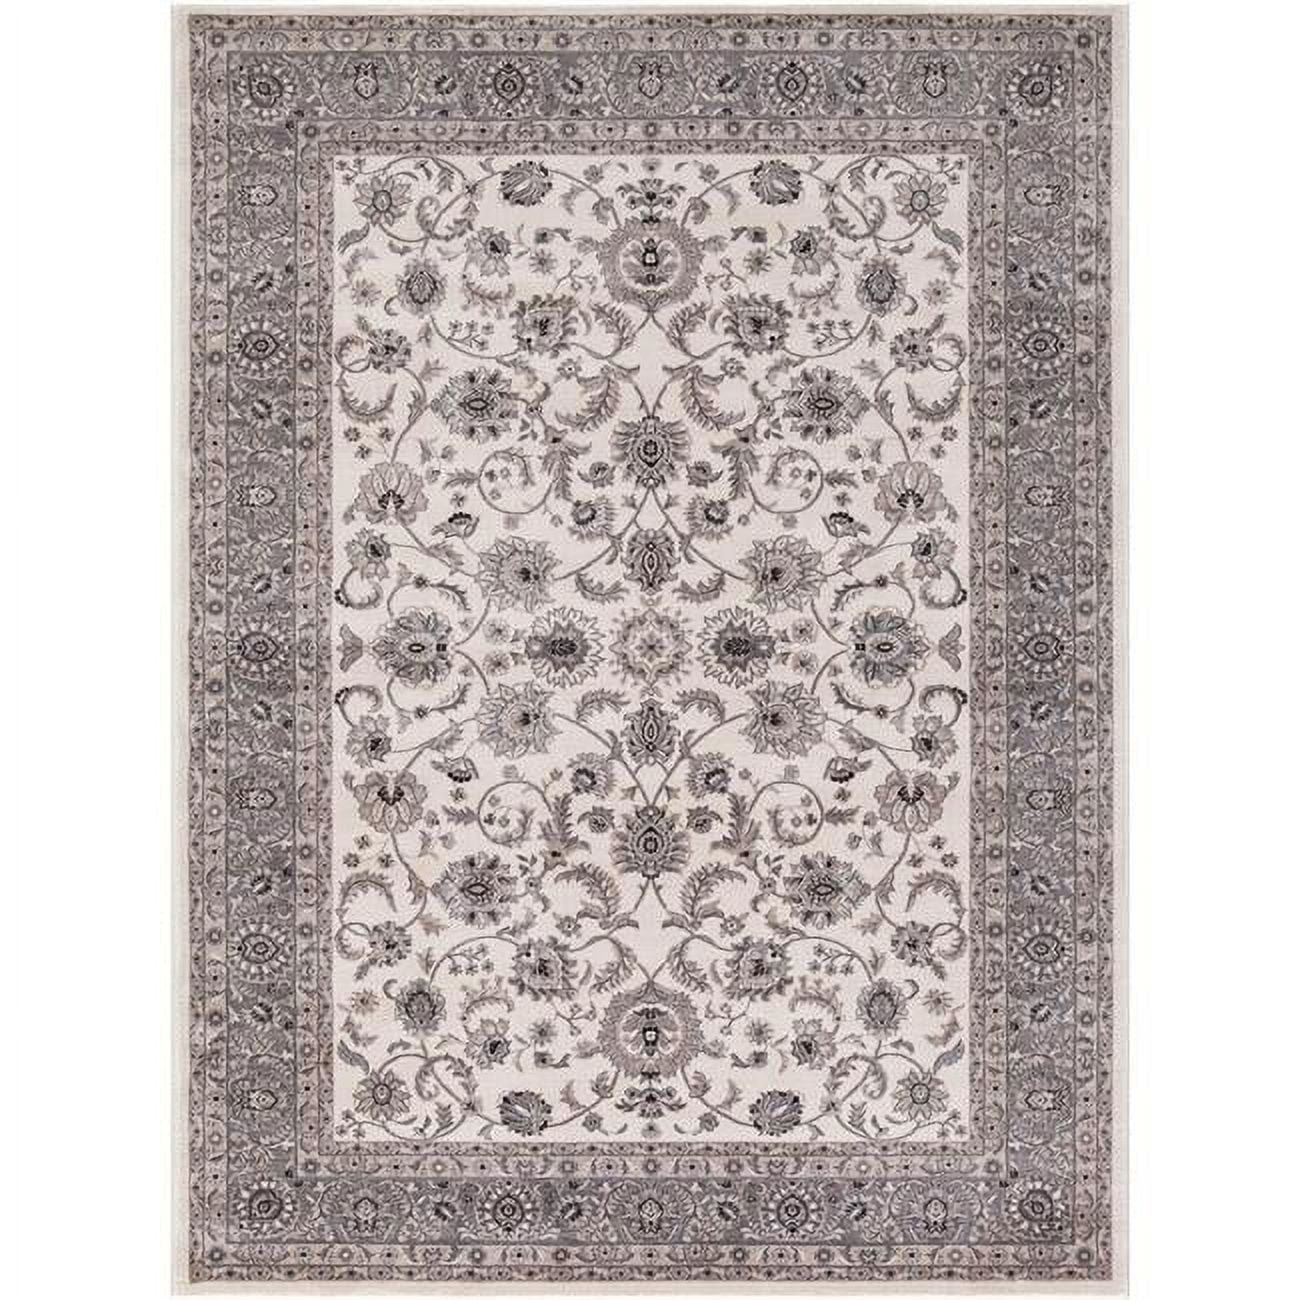 Picture of Concord Global 28214 3 ft. 3 in. x 4 ft. 7 in. Kashan Mahal - Beige